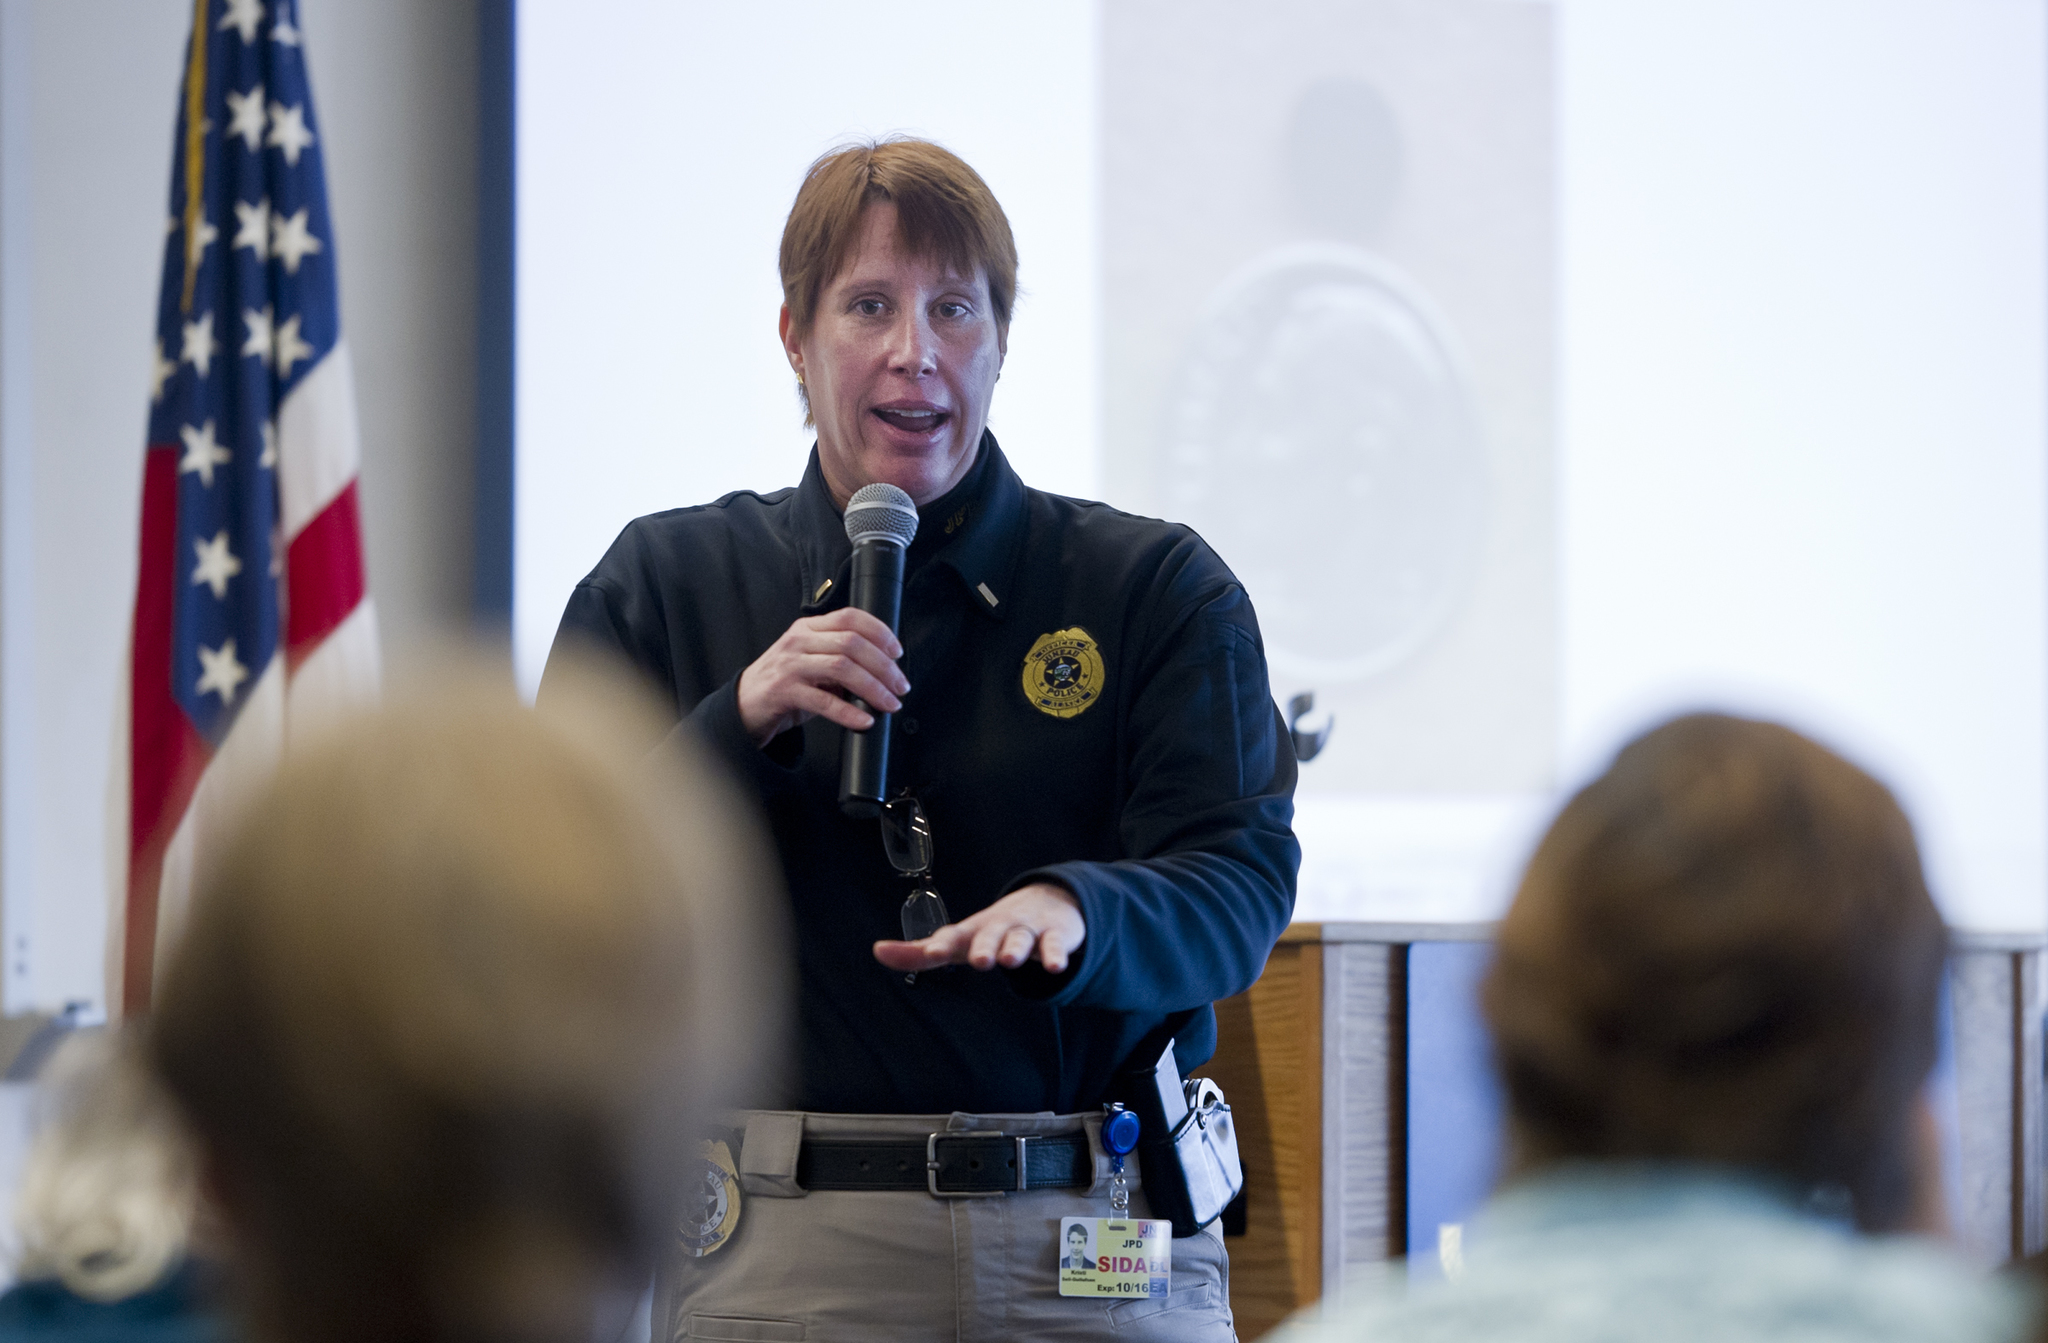 In this December 2015 file photo, Juneau Police Department Lt. Kris Sell speaks to the Juneau Chamber of Commerce about the recent uptick in heroin usage and violent crime in Juneau. (Michael Penn | Juneau Empire File)